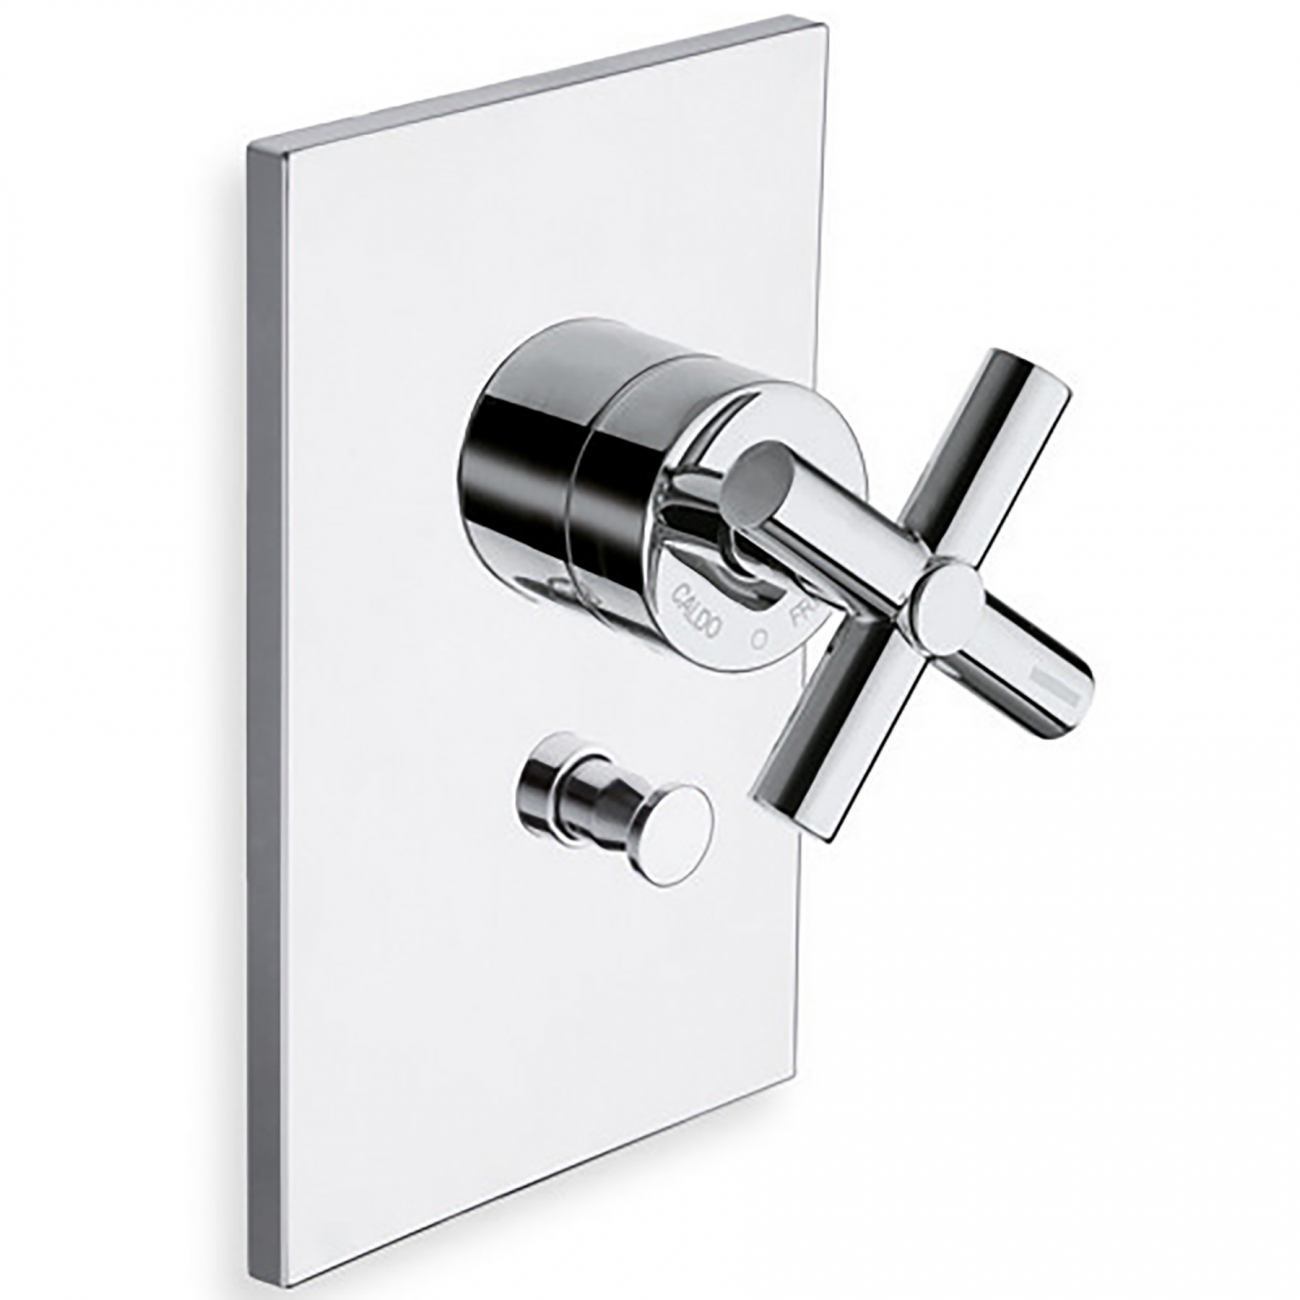 Cristina Contemporary Lines Exclusive Wall Mounted Shower Mixer with Diverter